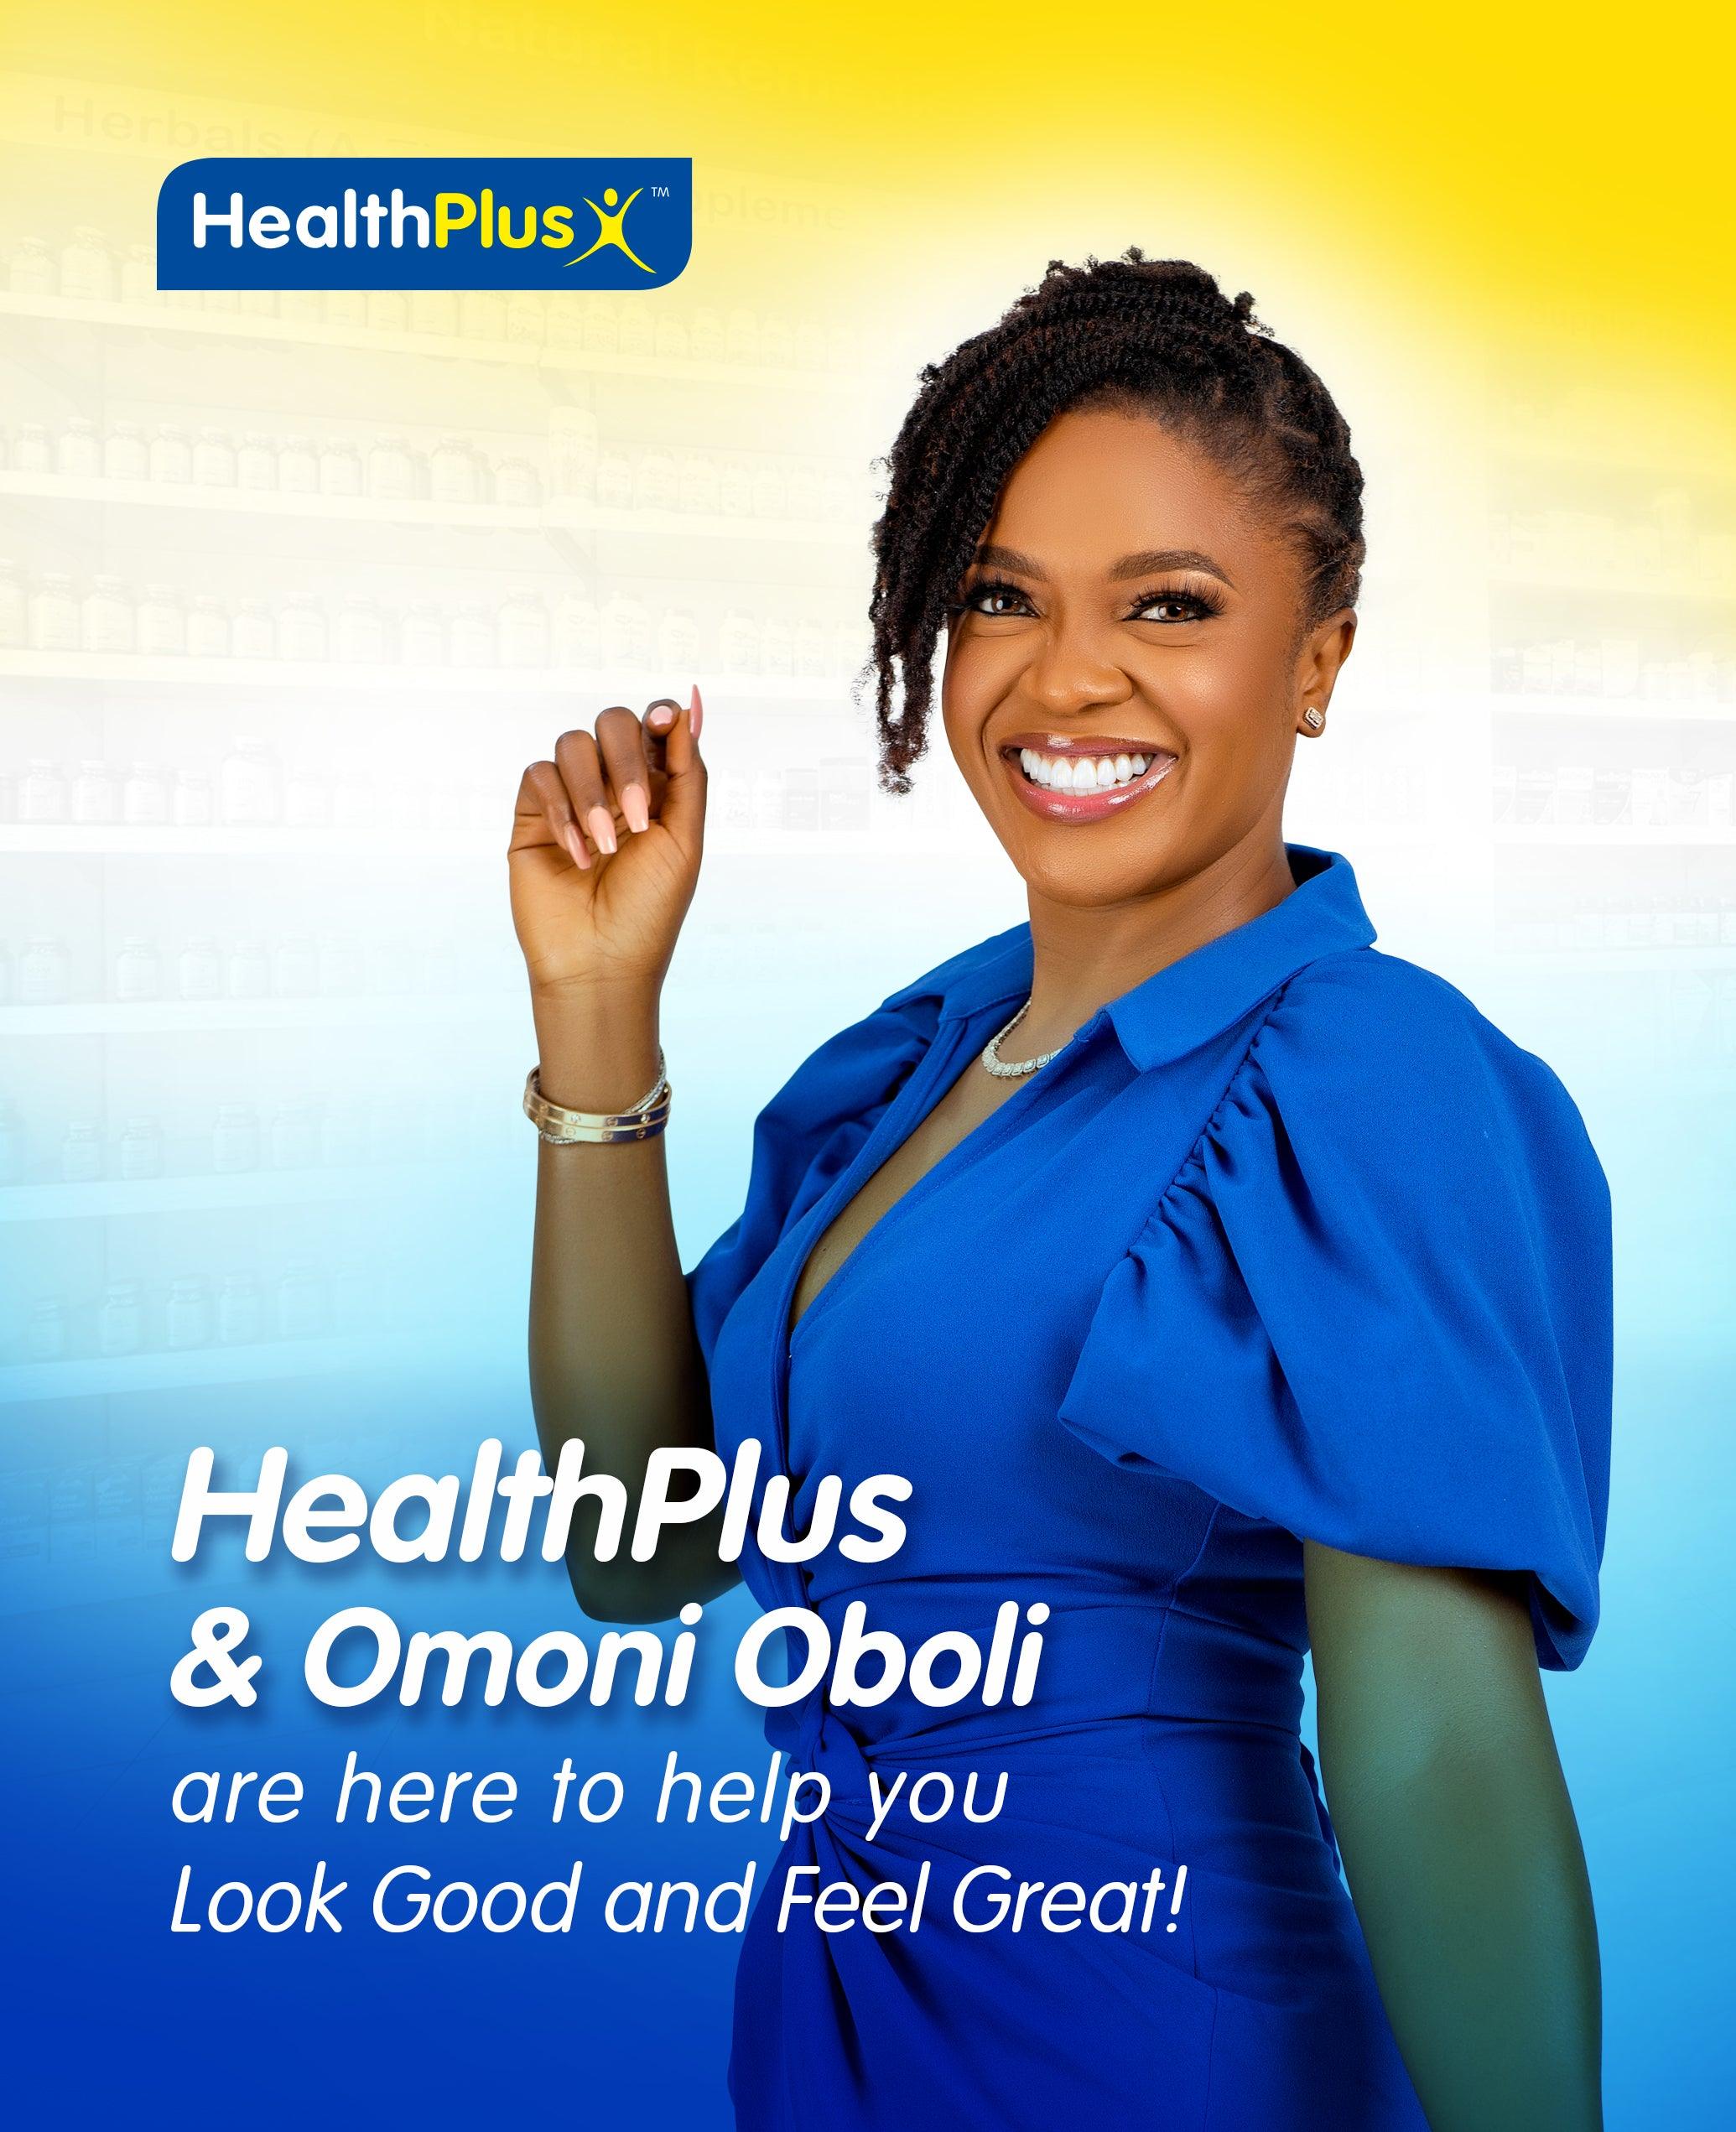 HealthPlus and Omoni Oboli – On a Mission to Help You Look Good and Feel Great! - HealthPlus